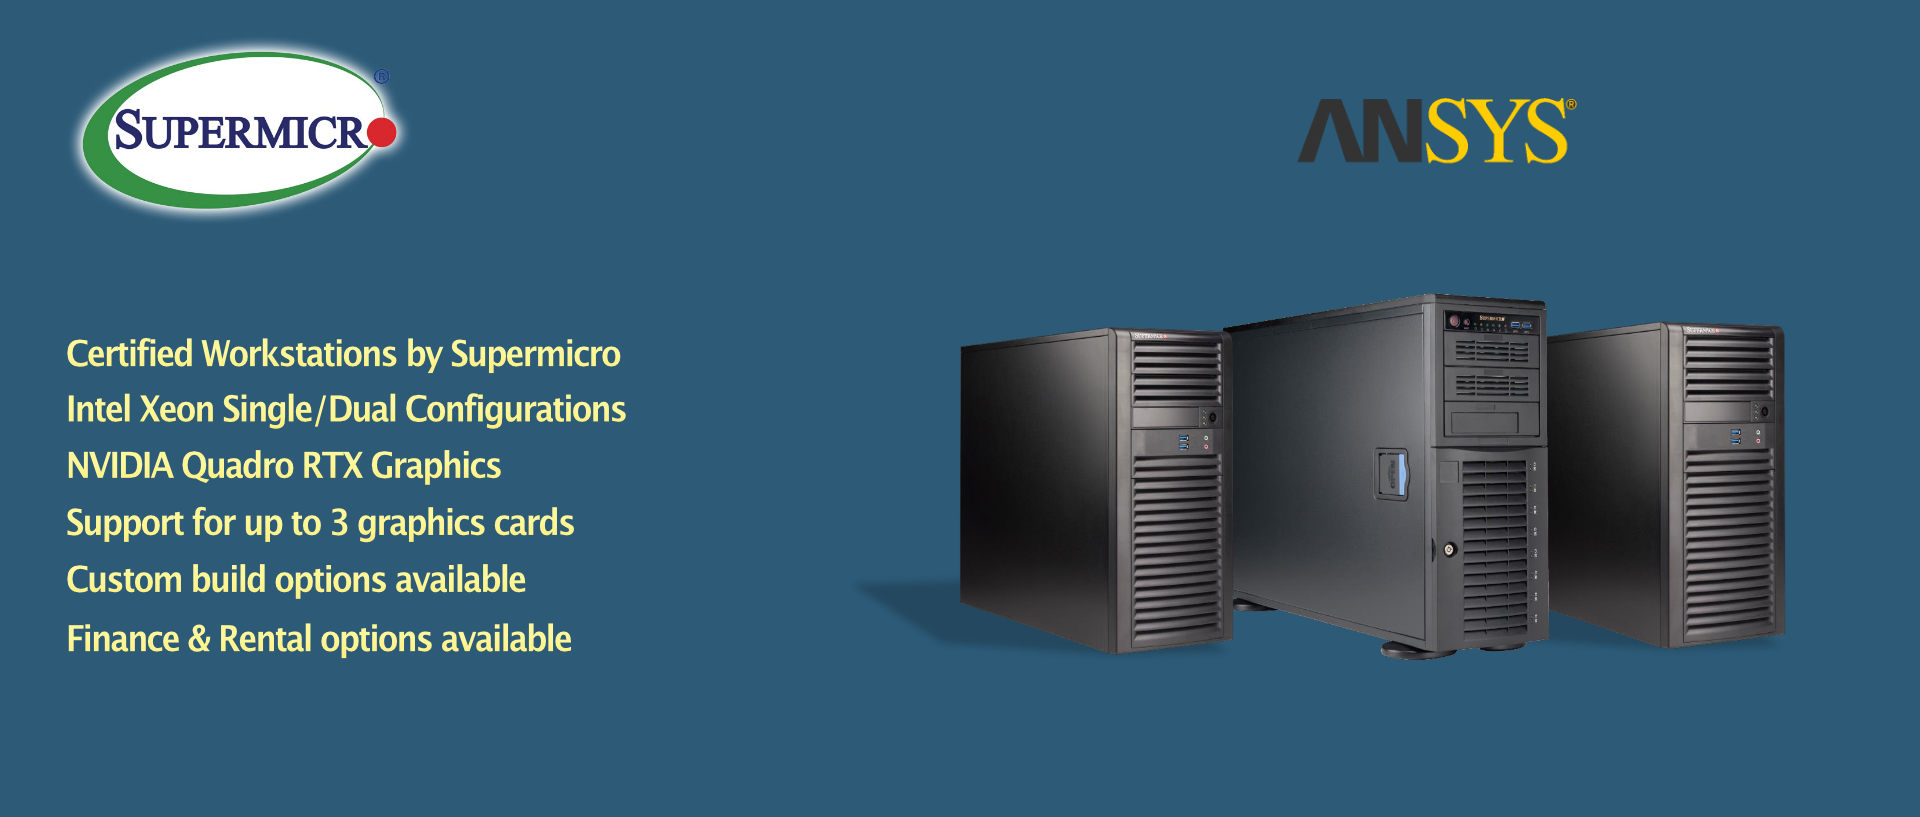 ANSYS Workstations2